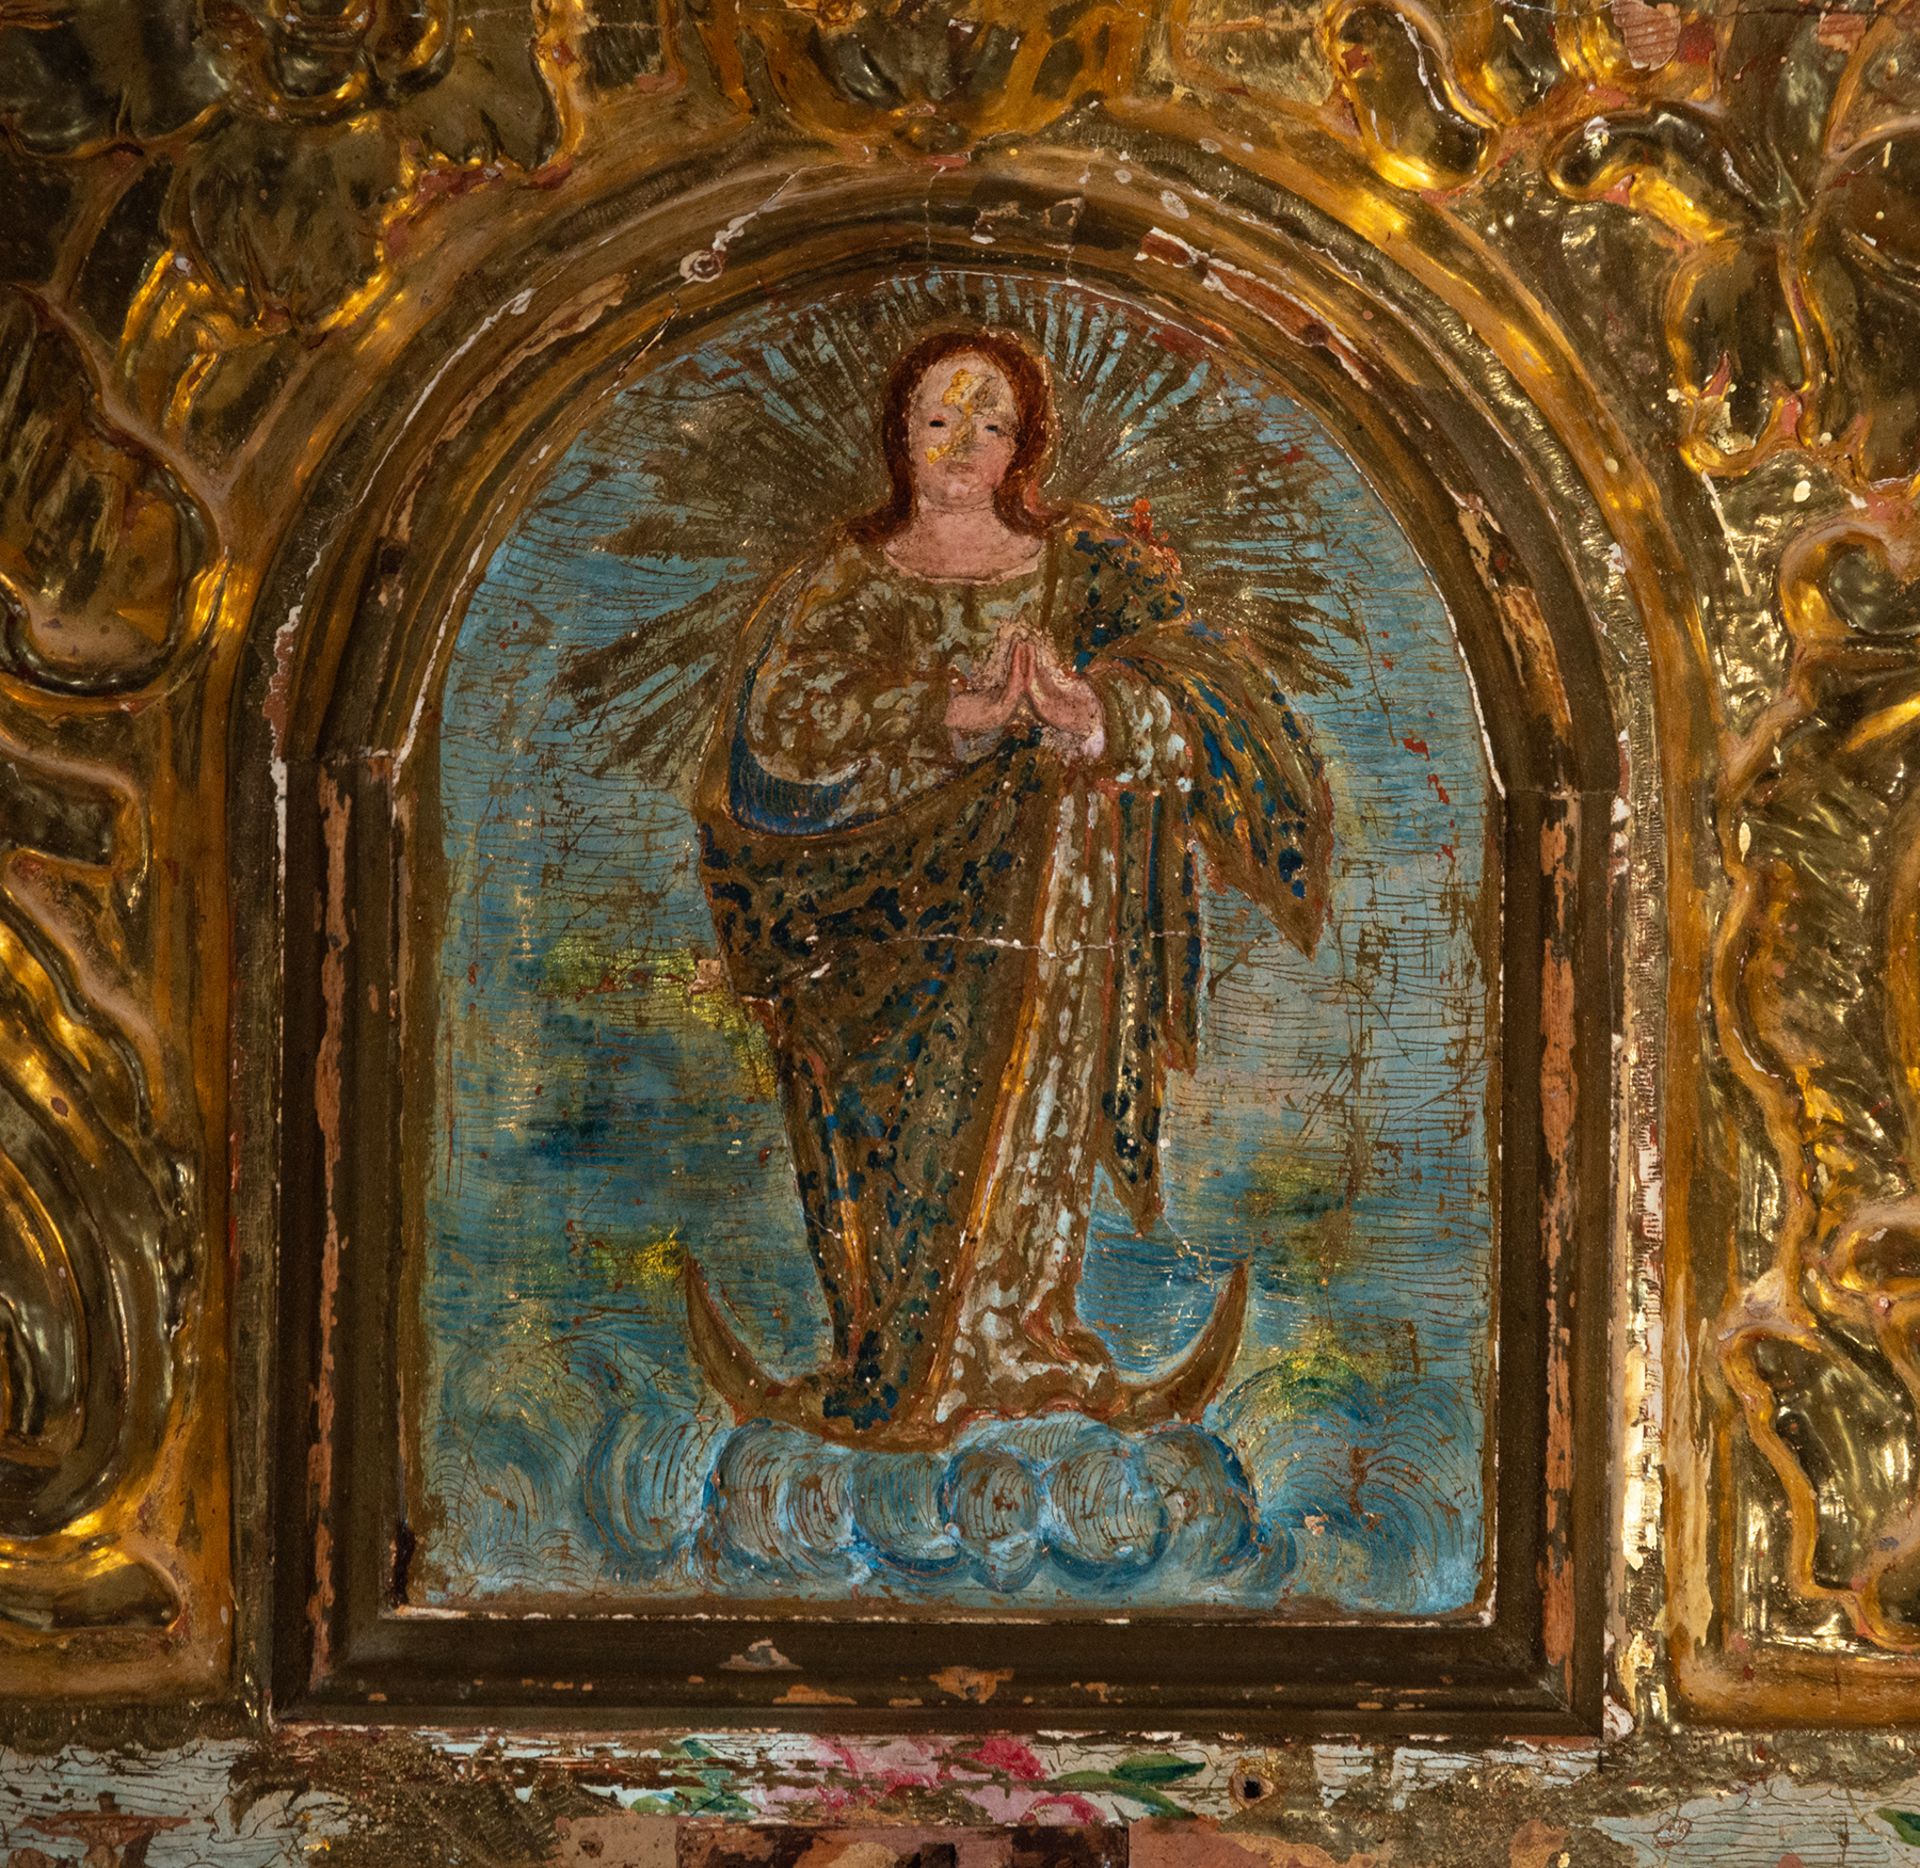 Altar frontal of a private chapel, 17th century - Image 4 of 4